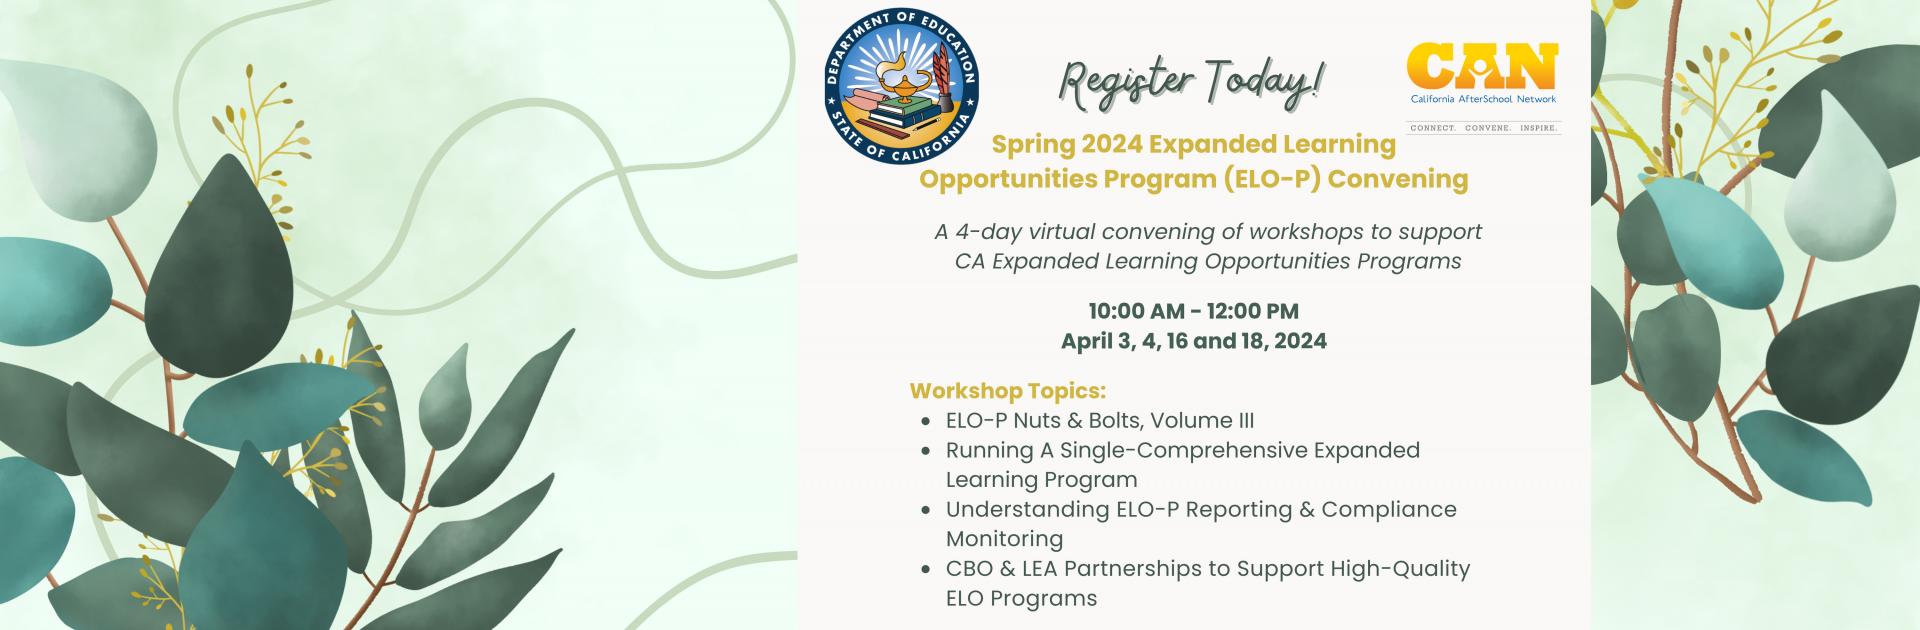 Spring 2024 Expanded Learning Opportunities Program (ELO-P) Convening . A 4-day virtual convening of workshops to support CA Expanded Learning Opportunities Programs.  10:00 AM - 12:00 PM April 3, 4, 16 and 18, 2024.  Workshop Topics: ELO-P Nuts & Bolts, Volume III Running A Single-Comprehensive Expanded Learning Program Understanding ELO-P Reporting & Compliance Monitoring  CBO & LEA Partnerships to Support High-Quality ELO Programs. with leaves in the corners.